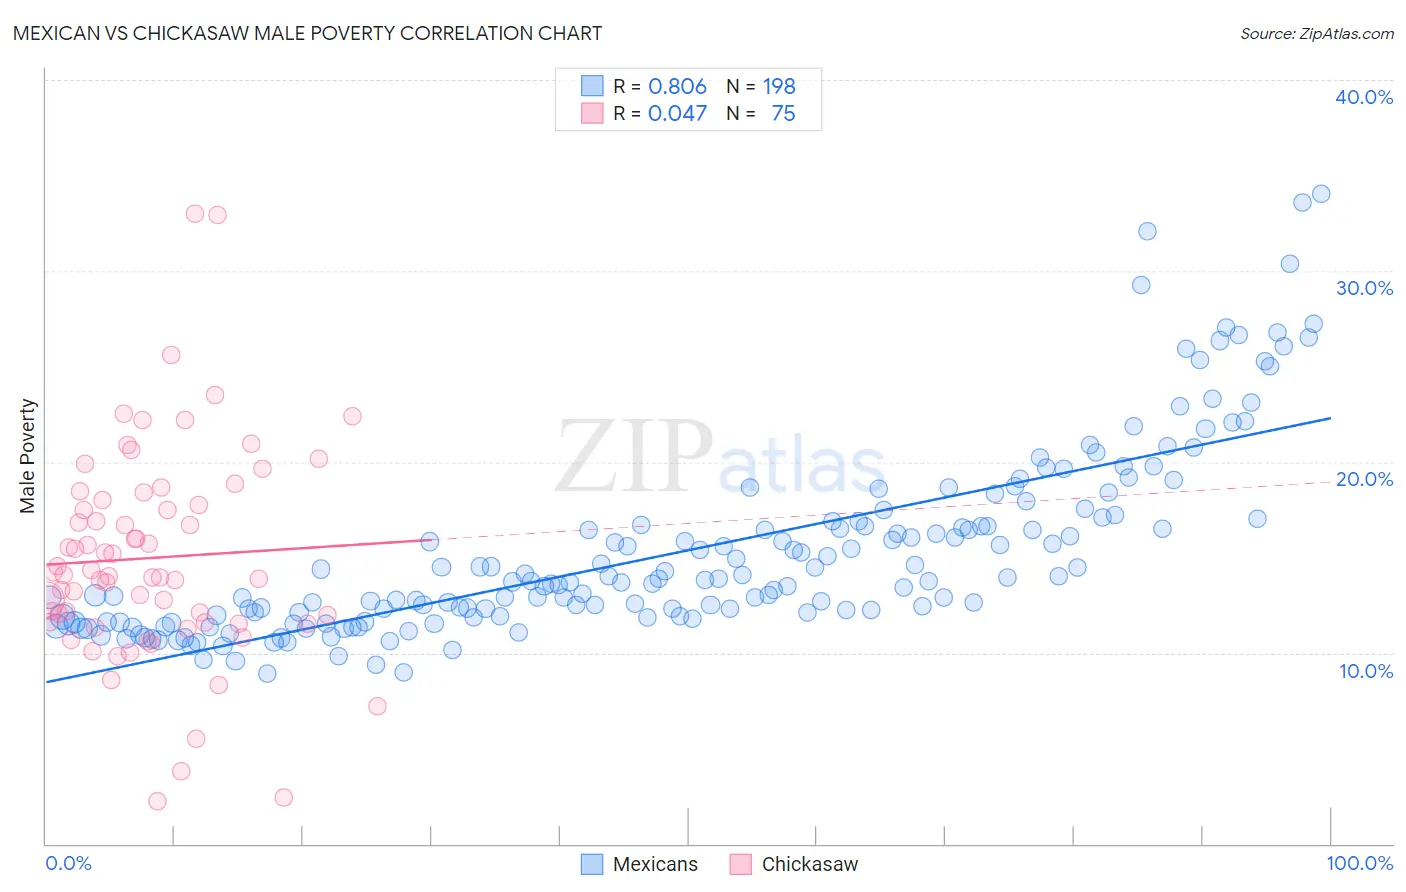 Mexican vs Chickasaw Male Poverty